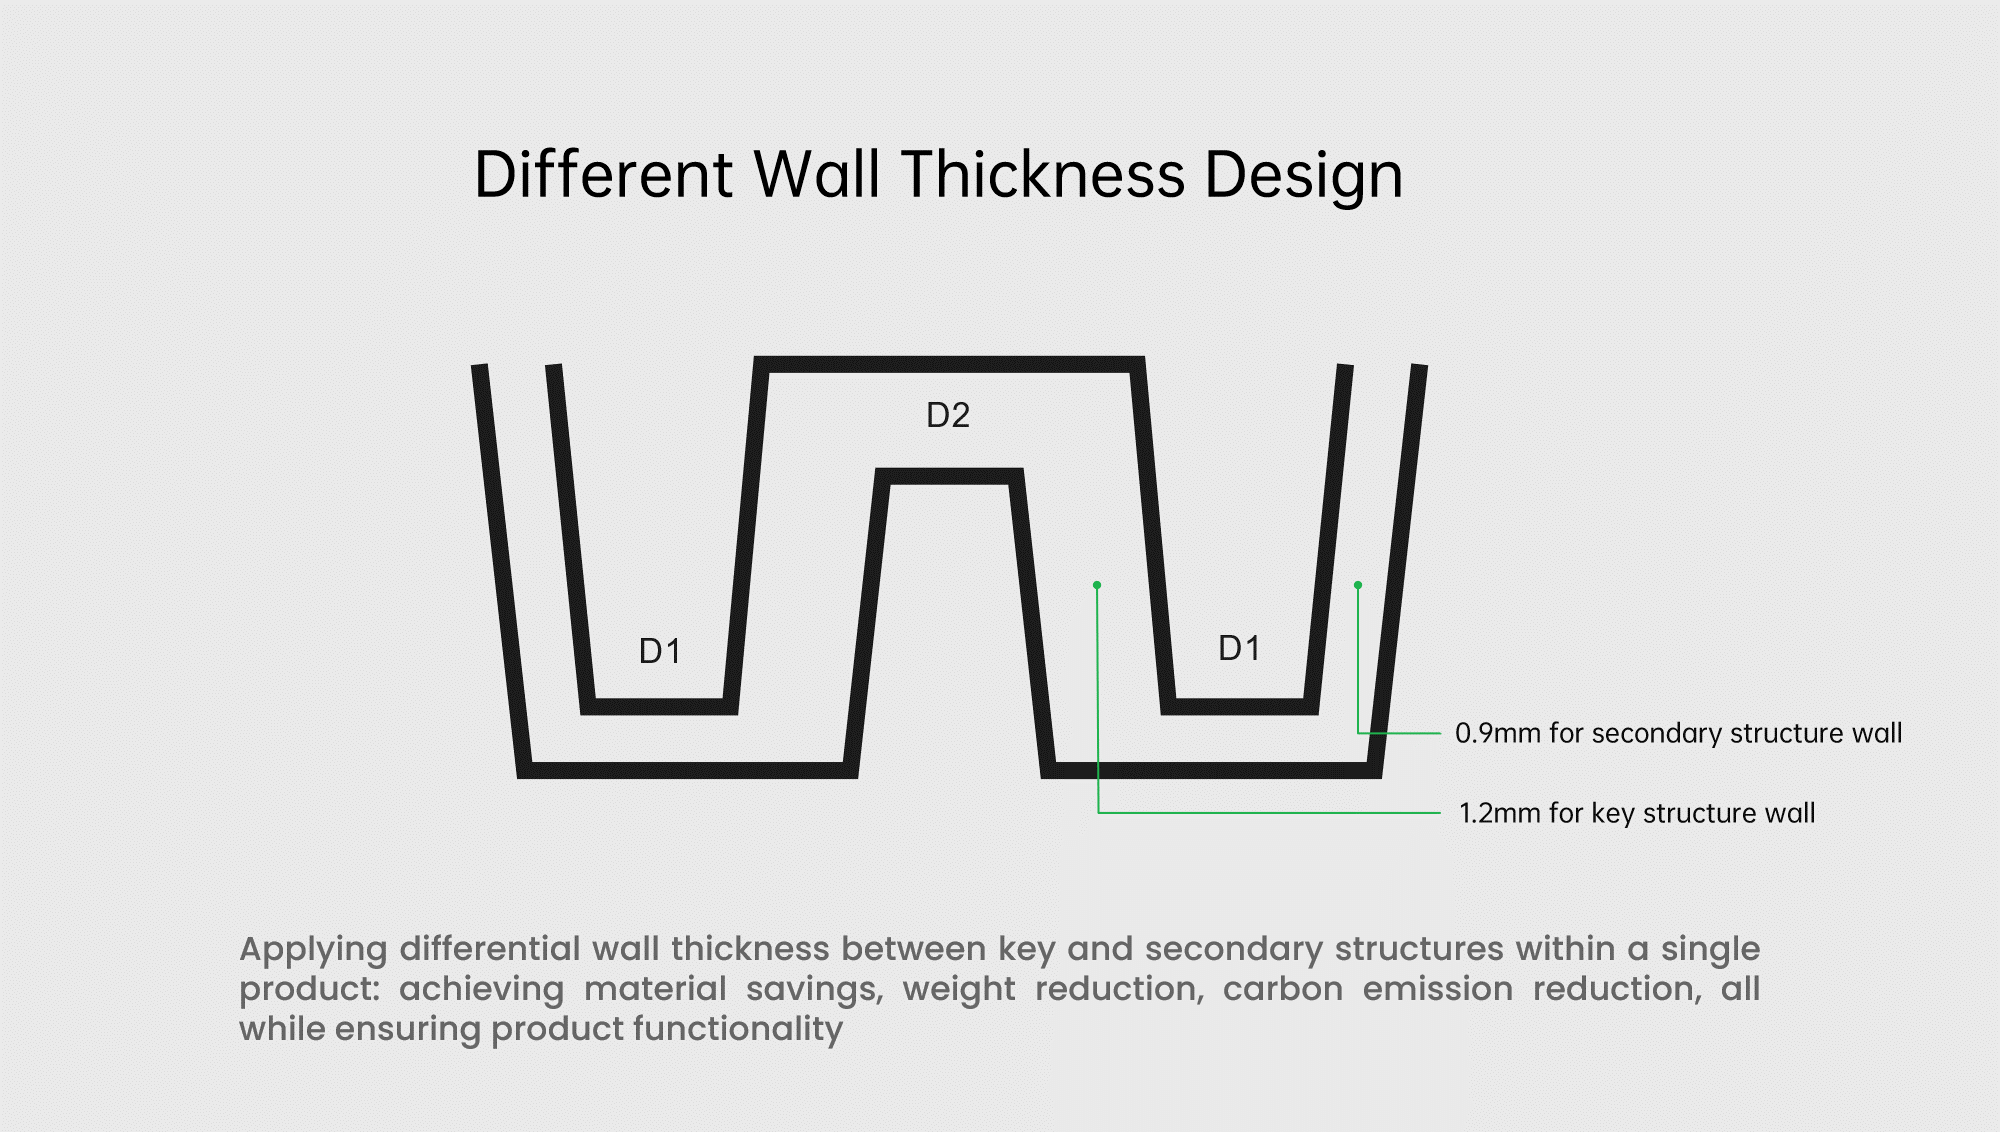 Different Wall Thickness Design